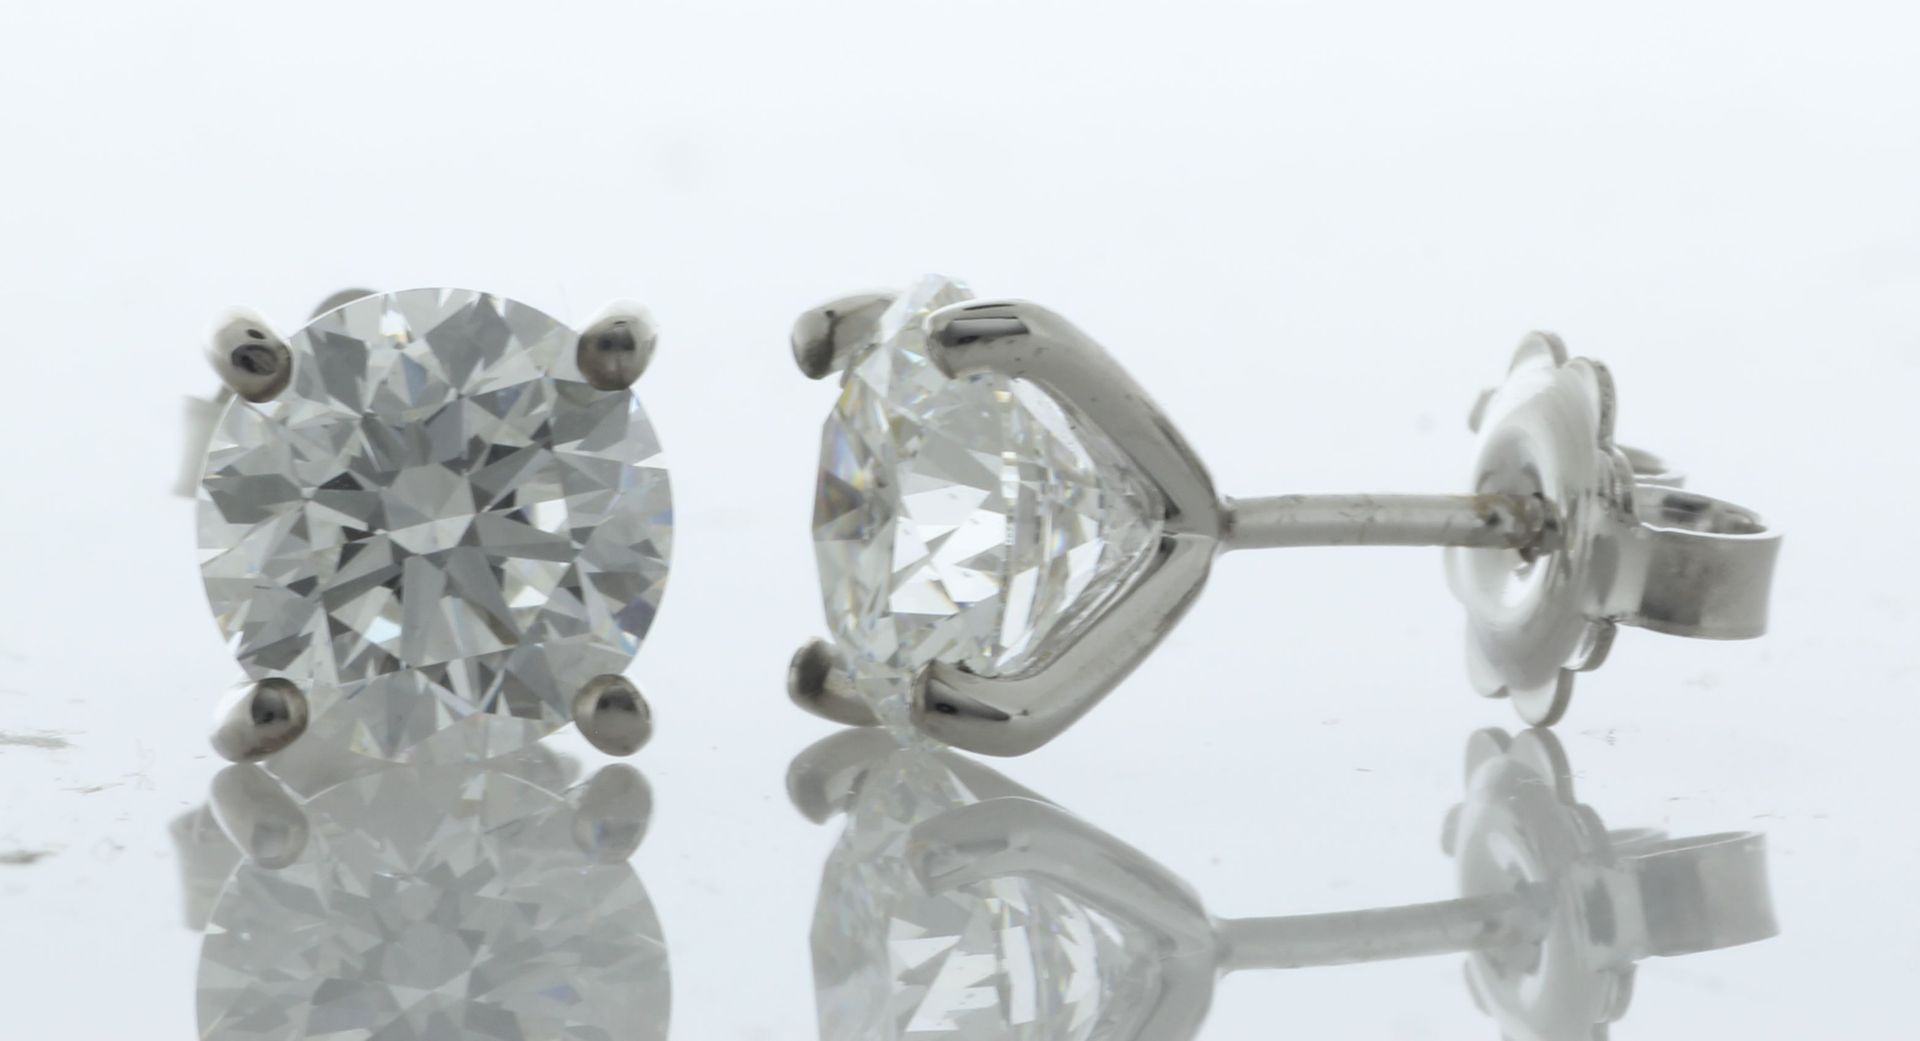 18ct White Gold LAB GROWN Diamond Earrings 3.40 Carats - Valued By AGI £28,340.00 - Two stunning